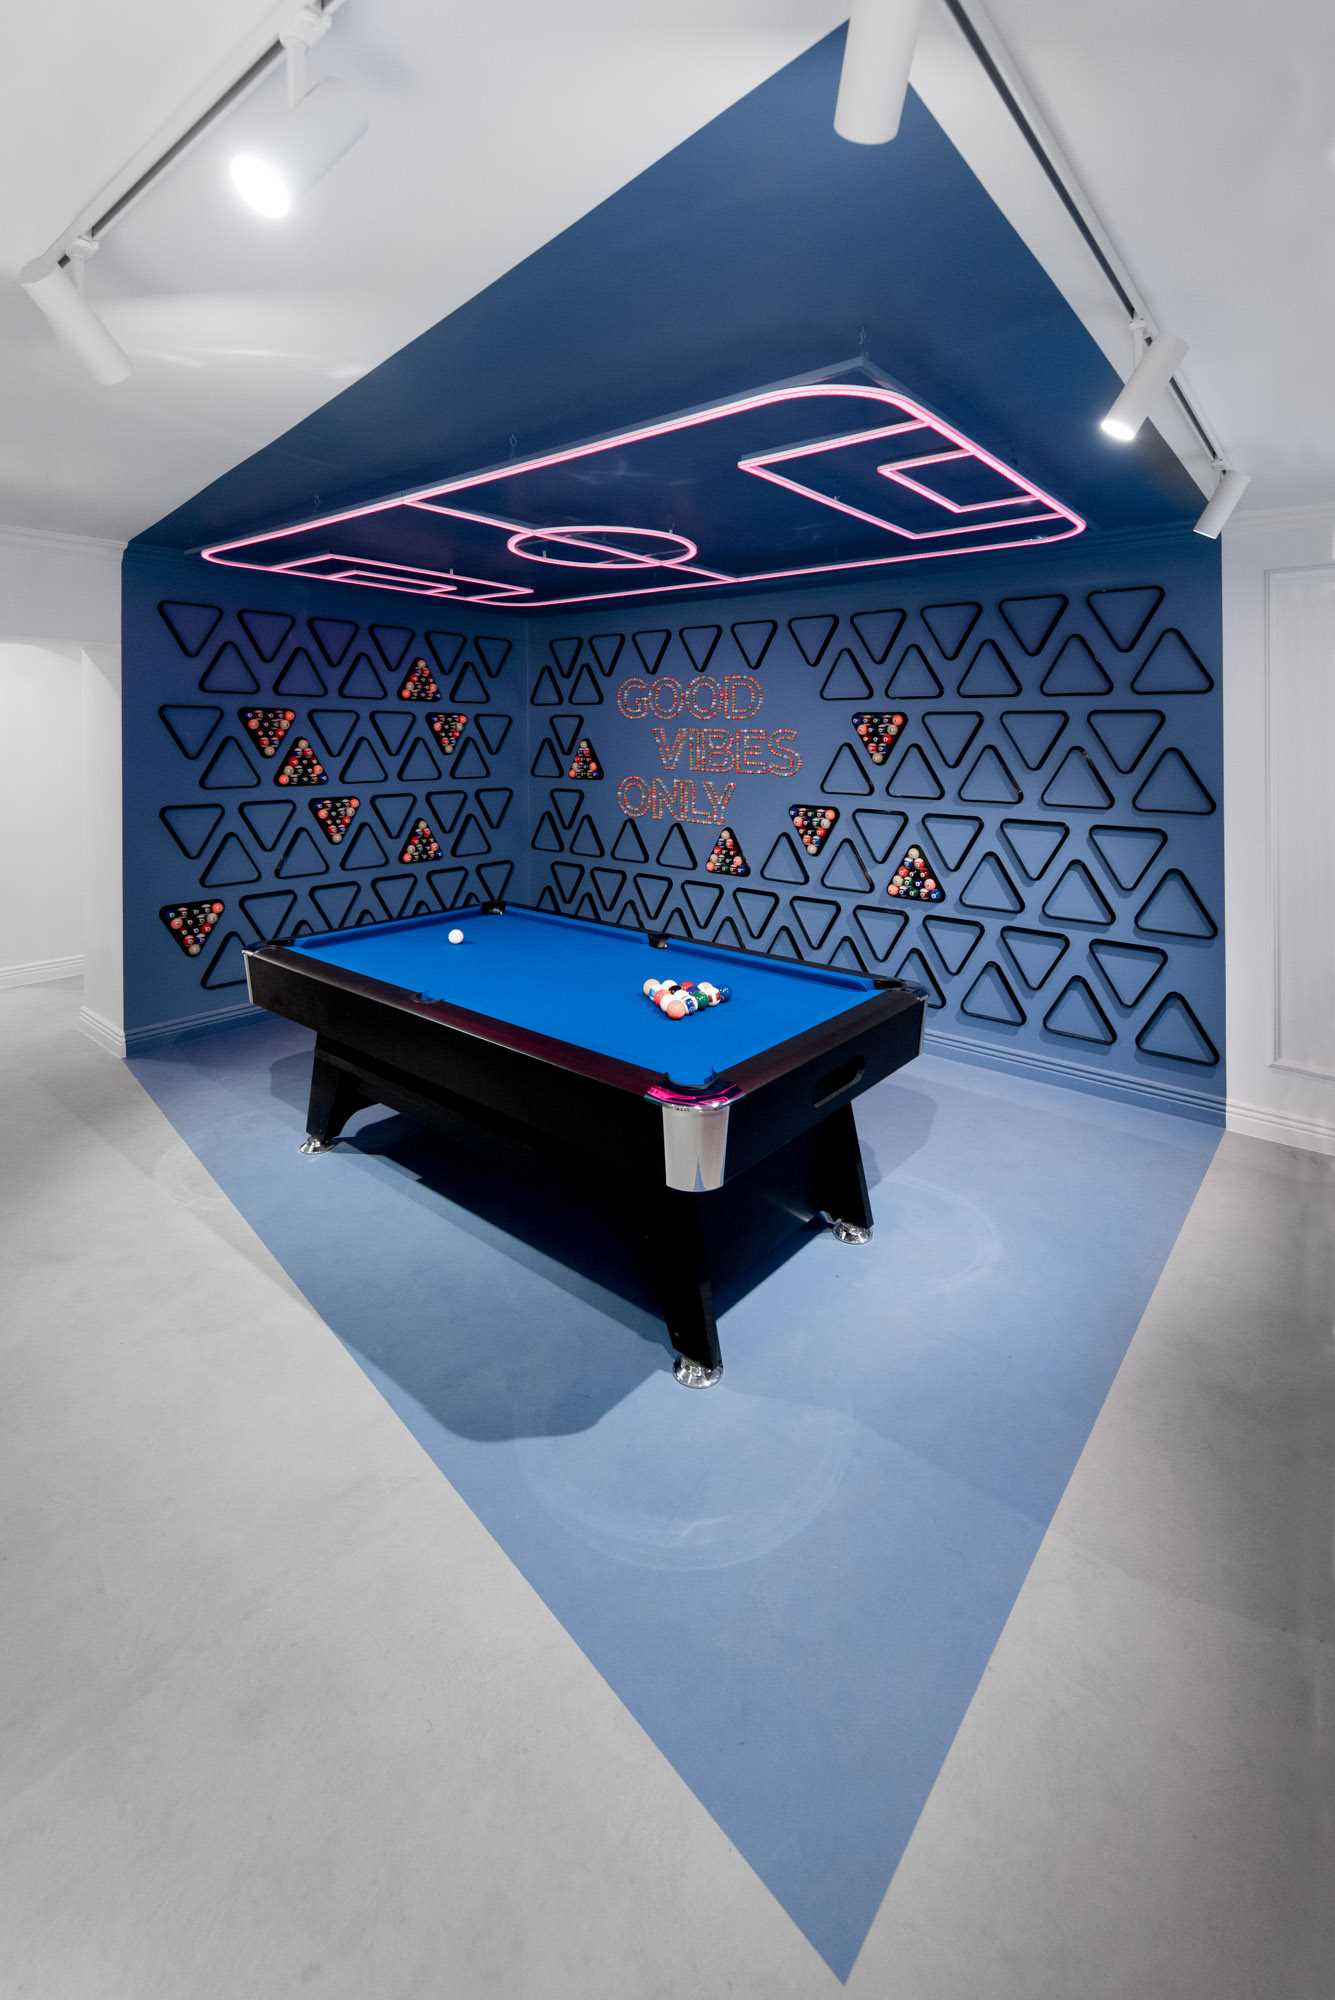 In this office break room, blue was chosen as the accent color, and it's been furnished with a billiard table, a neon accent light on the ceiling, and walls filled with billiard accessories.